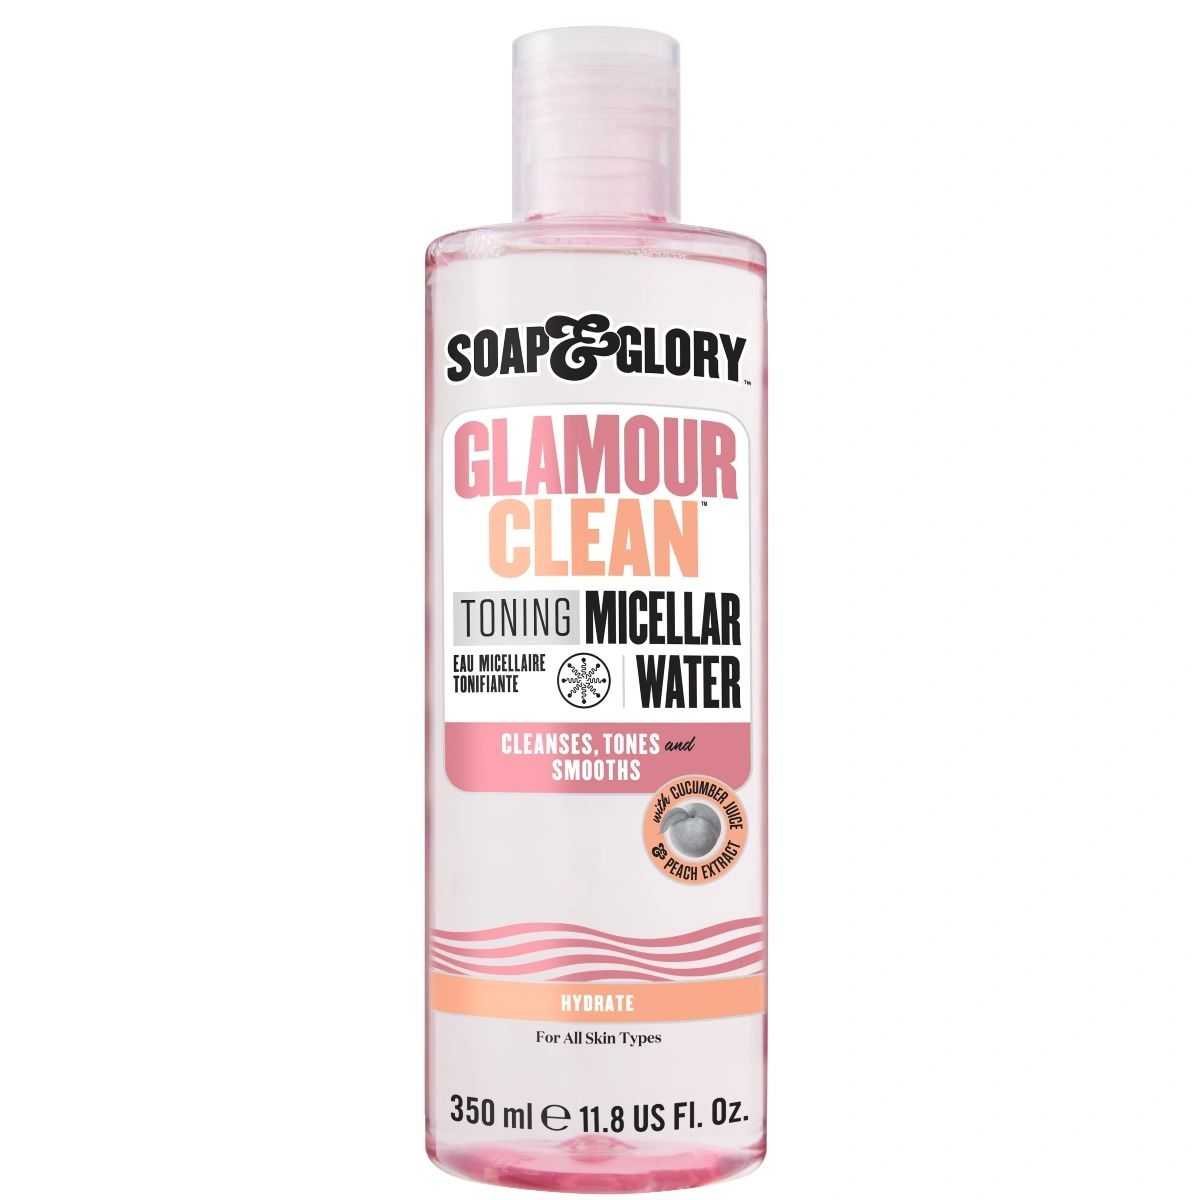 Soap & Glory Glamour Clean Micellar Water Remover